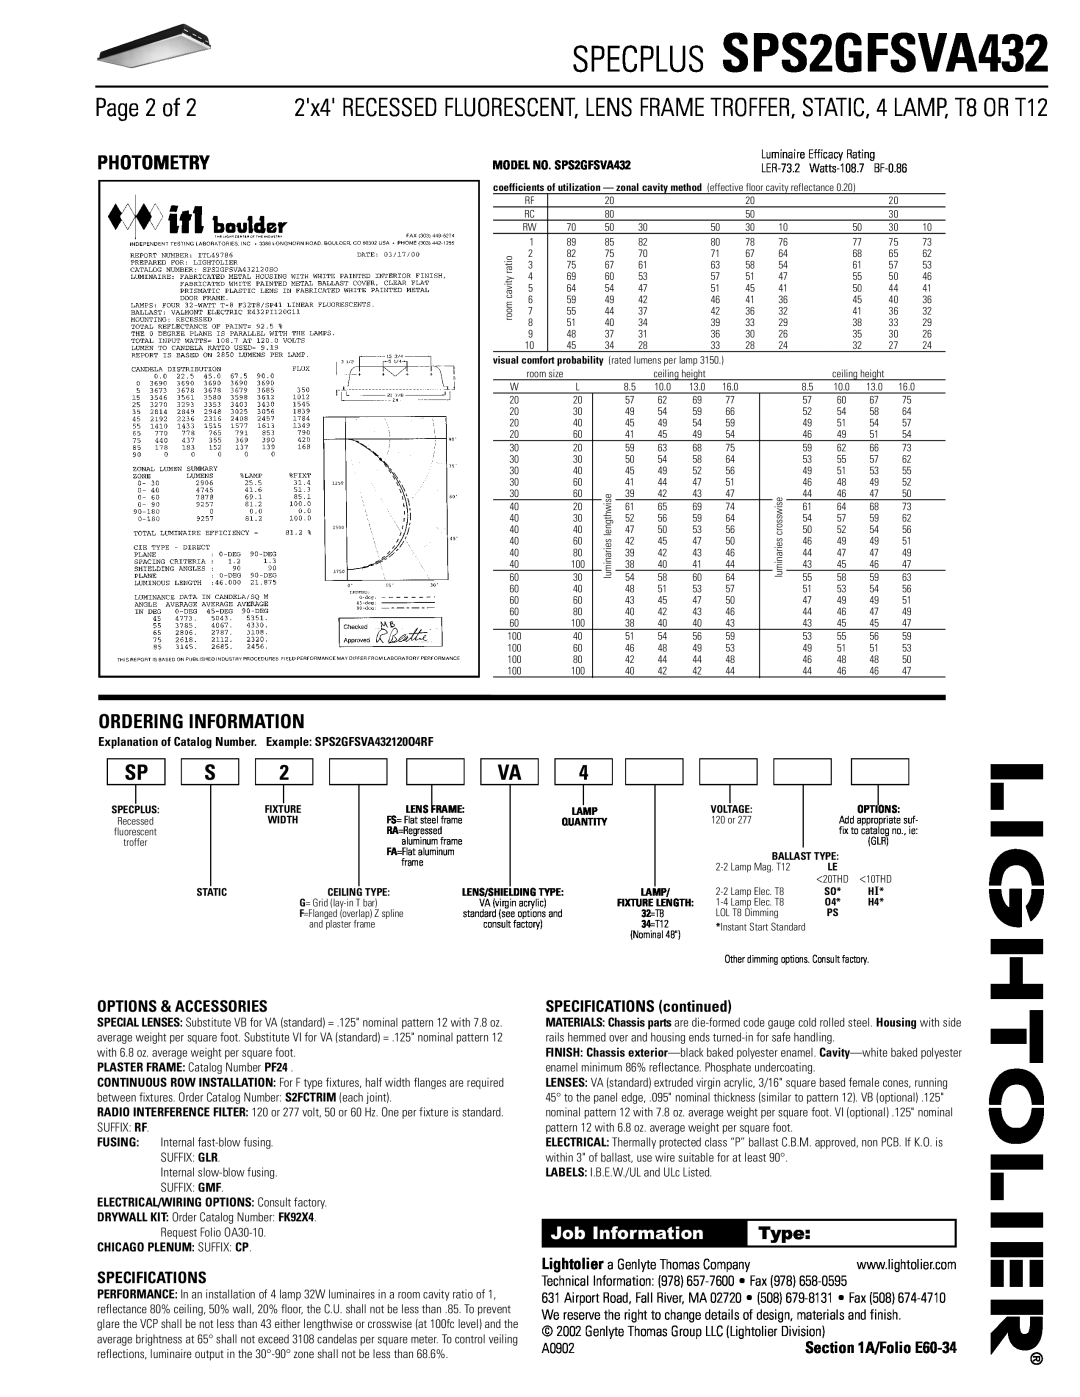 Lightolier Page 2 of, Photometry, Ordering Information, SPECPLUS SPS2GFSVA432, Job Information, Type, Specifications 